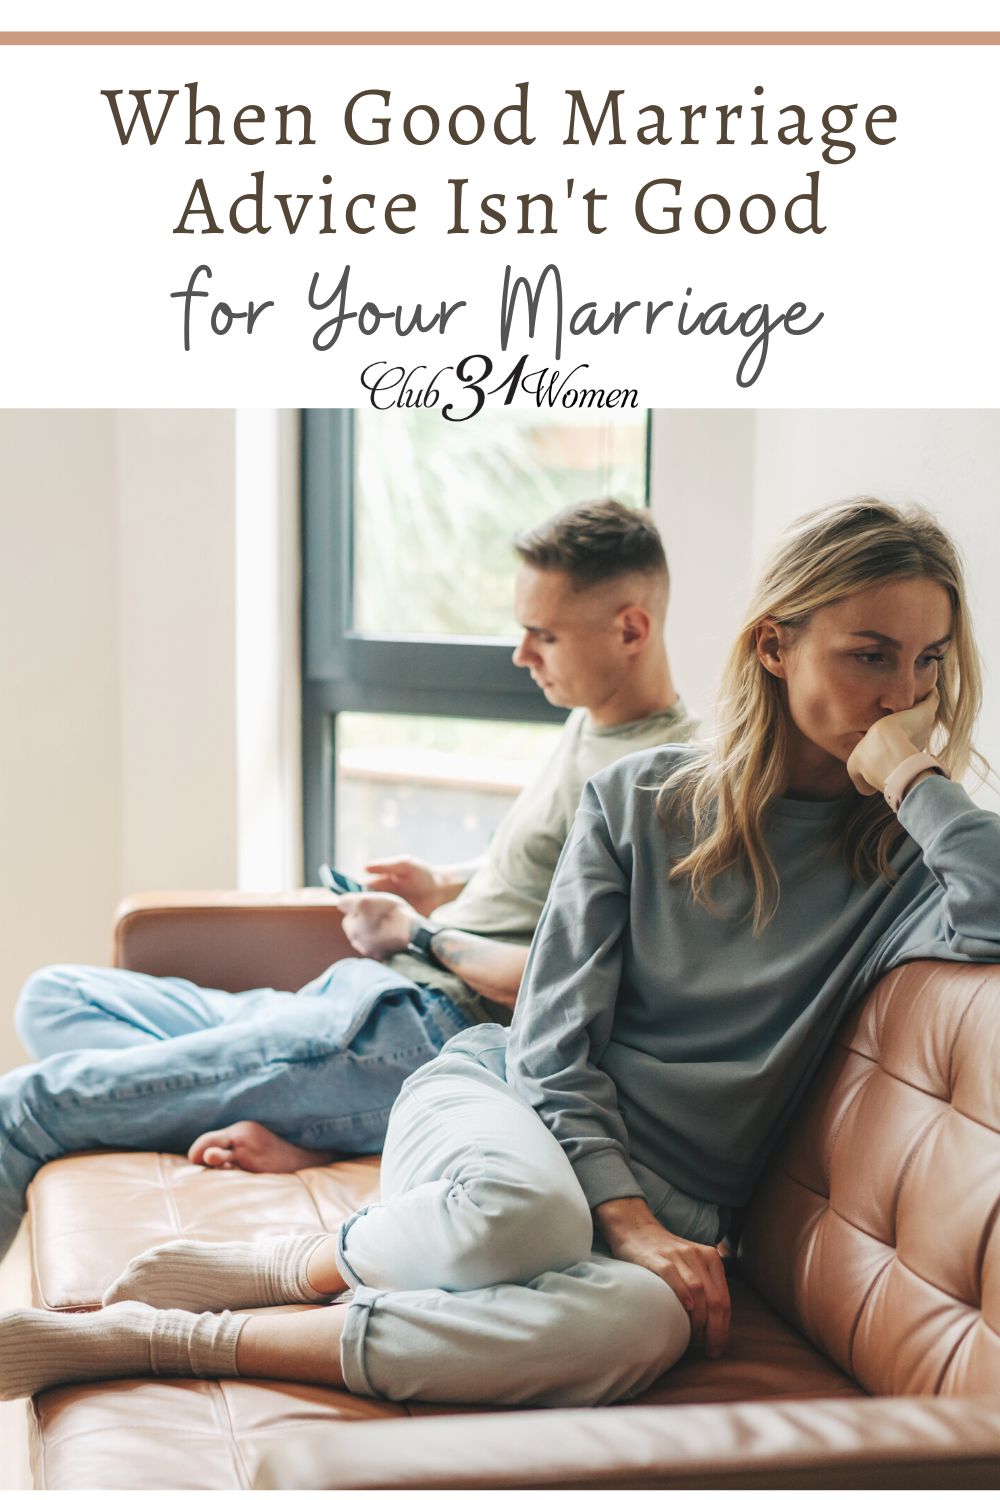 There is some amazing marriage advice but what happens when good marriage advice isn't good for your marriage? It's time to dig deeper. via @Club31Women